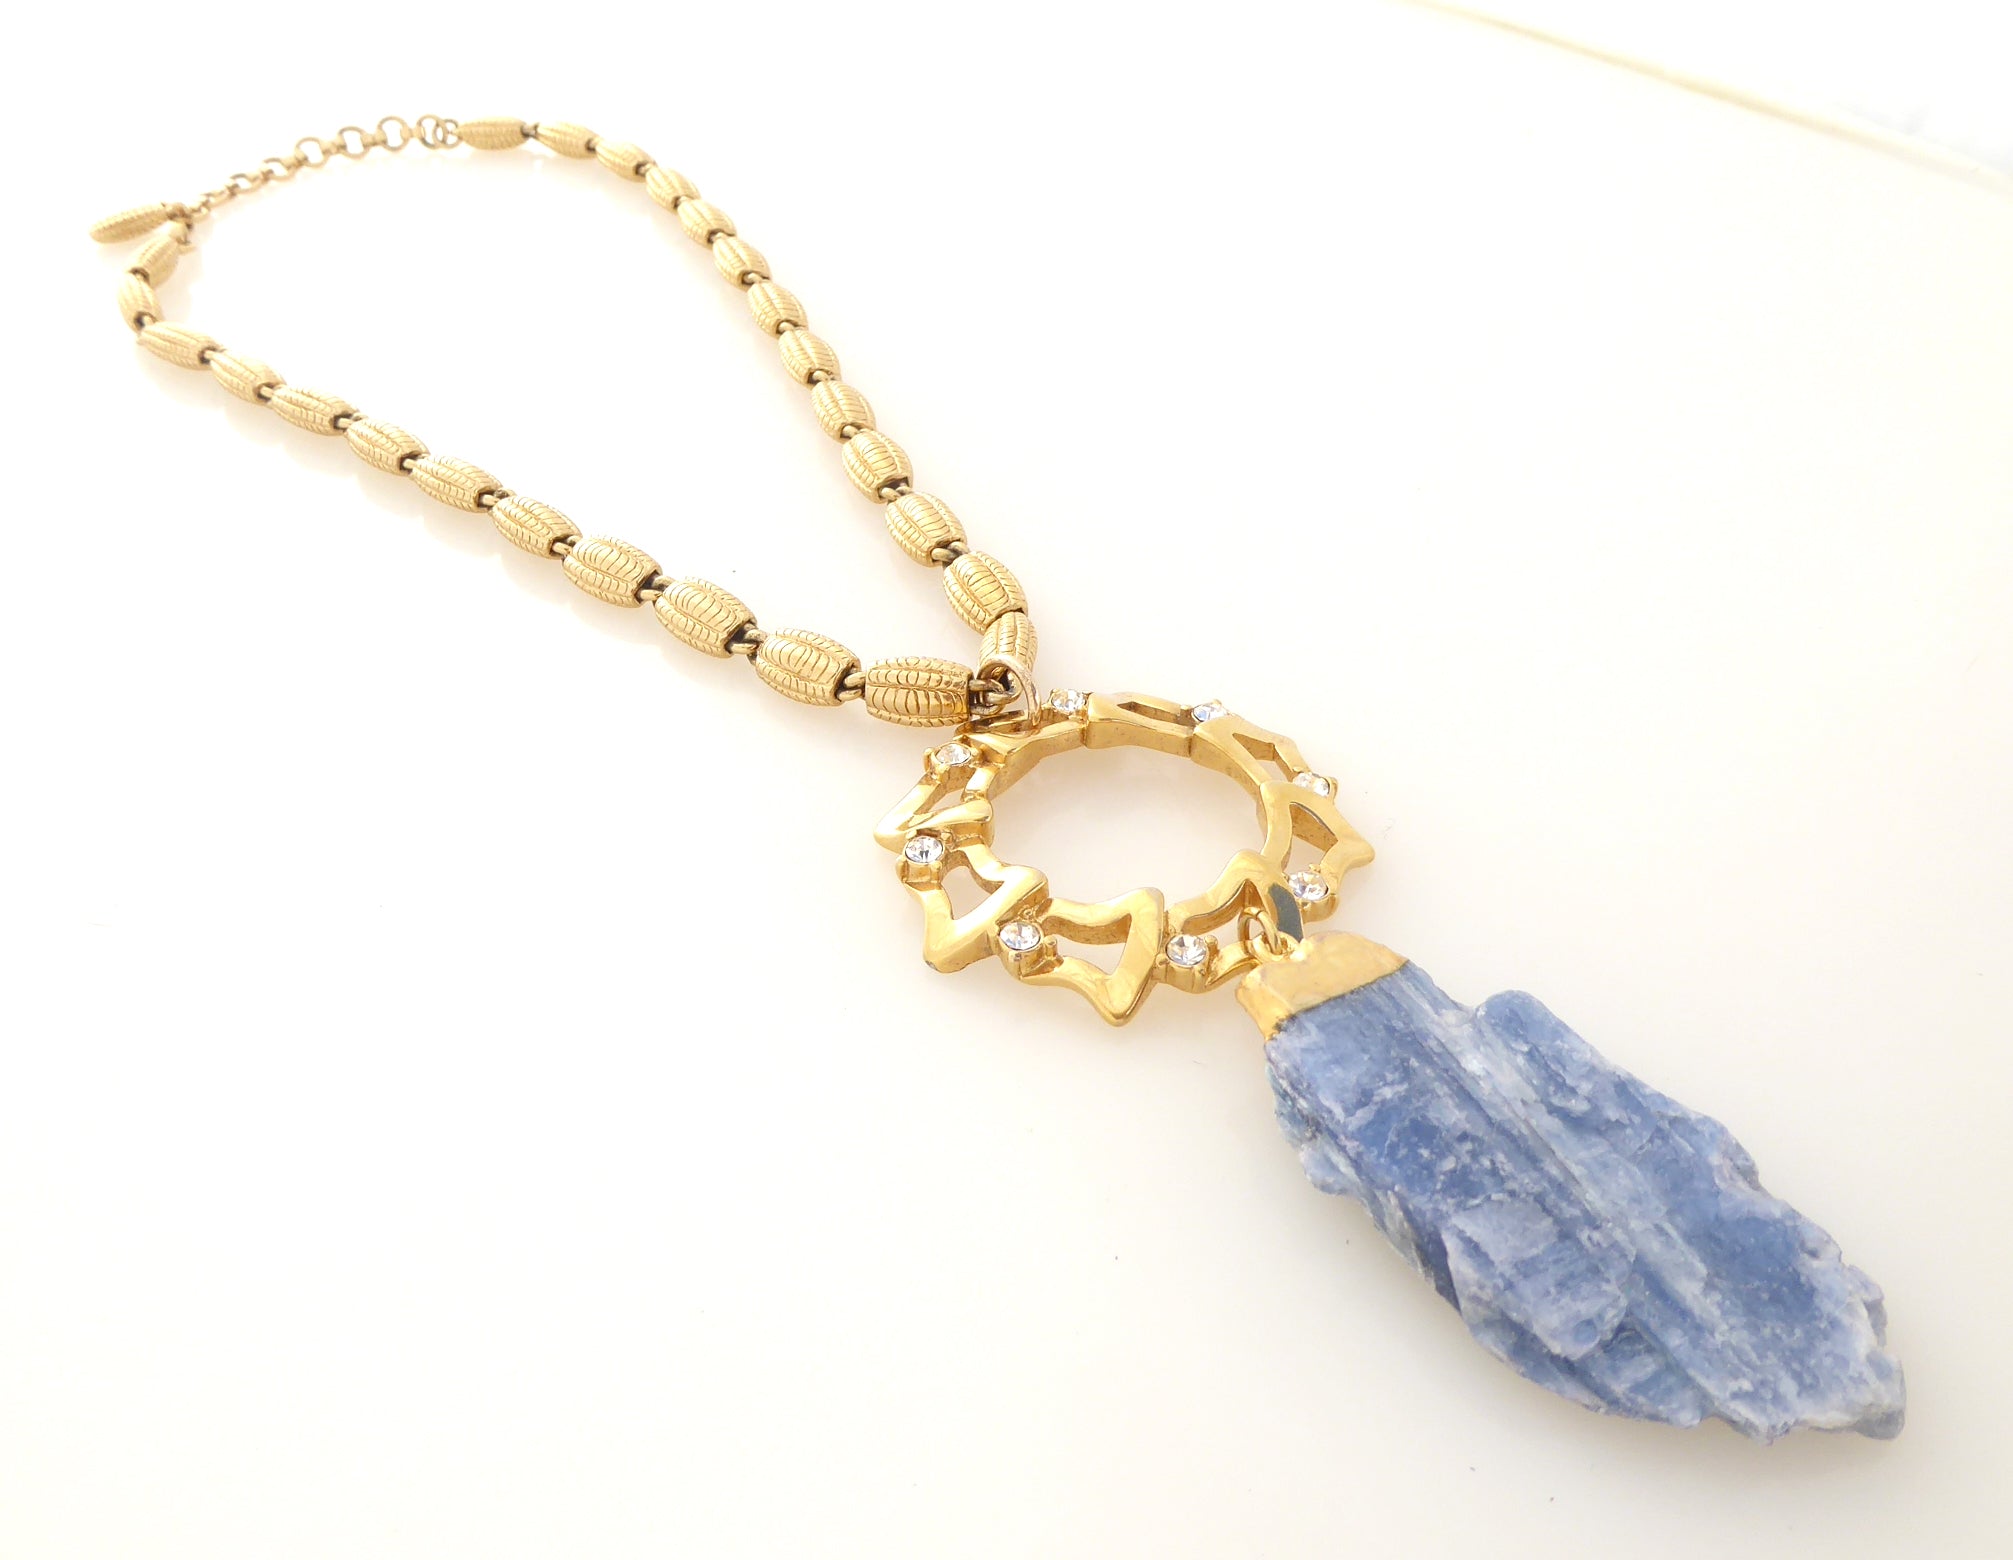 Blue kyanite and gold rhinestone flower vintage chain necklace by Jenny Dayco 2